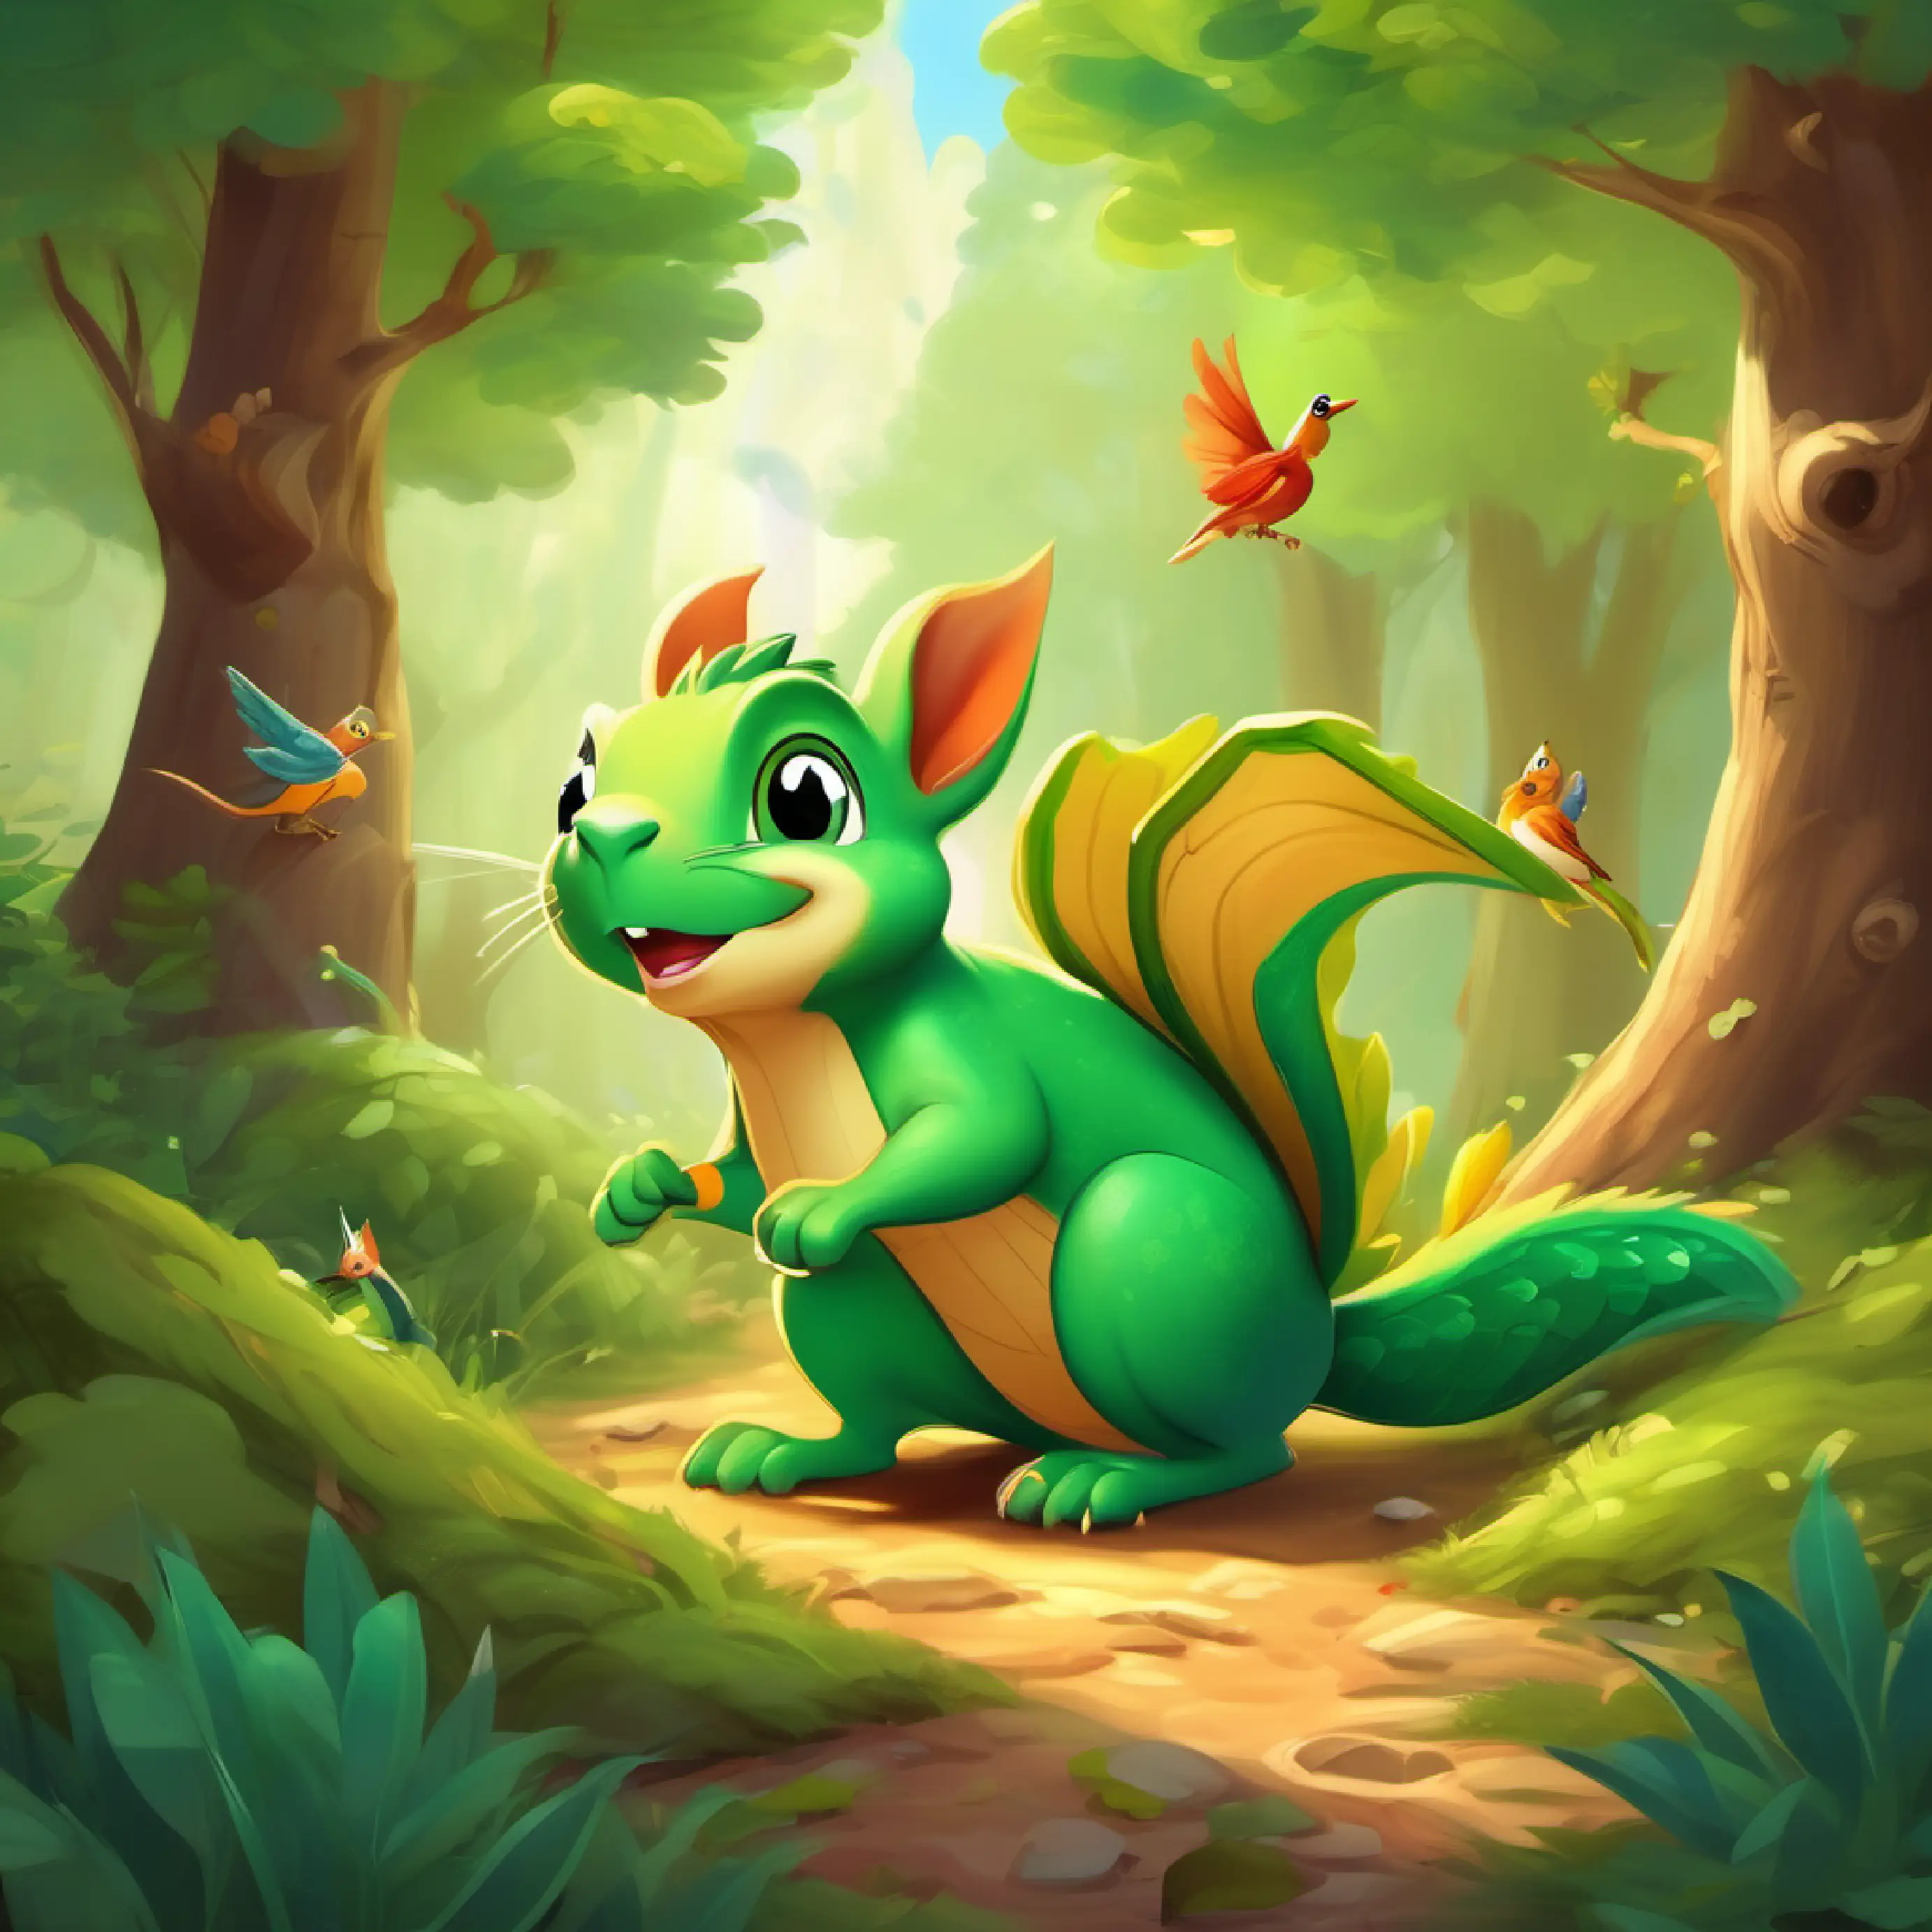 A little green dragon with curious eyes and a friendly smile meets singing birds and a playful squirrel throwing nuts in the forest.